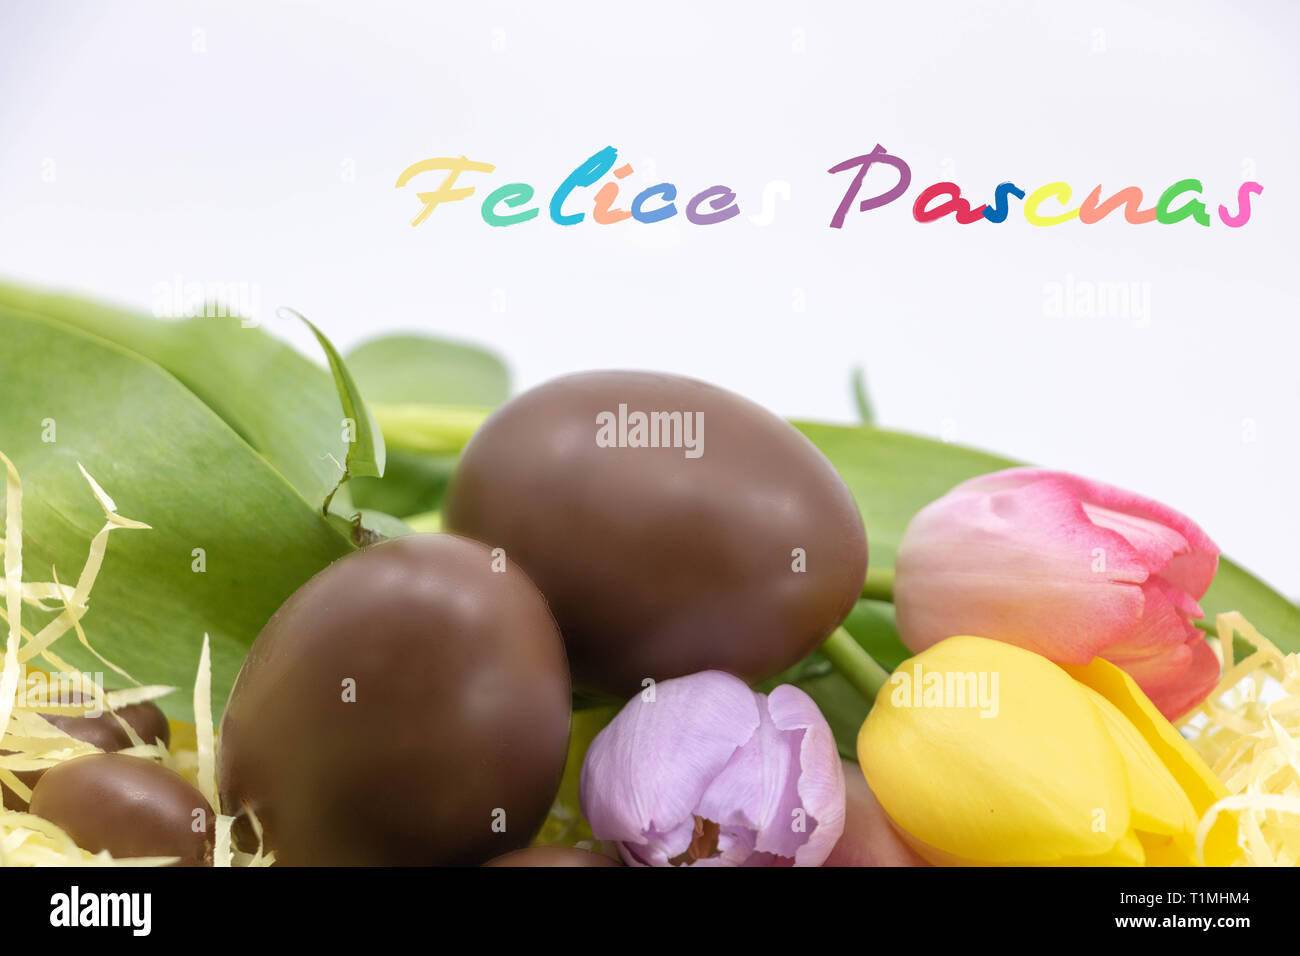 Spanish text (Felices pascuas is Happy Easter written in Spanish) very colorful to celebrate Easter Stock Photo